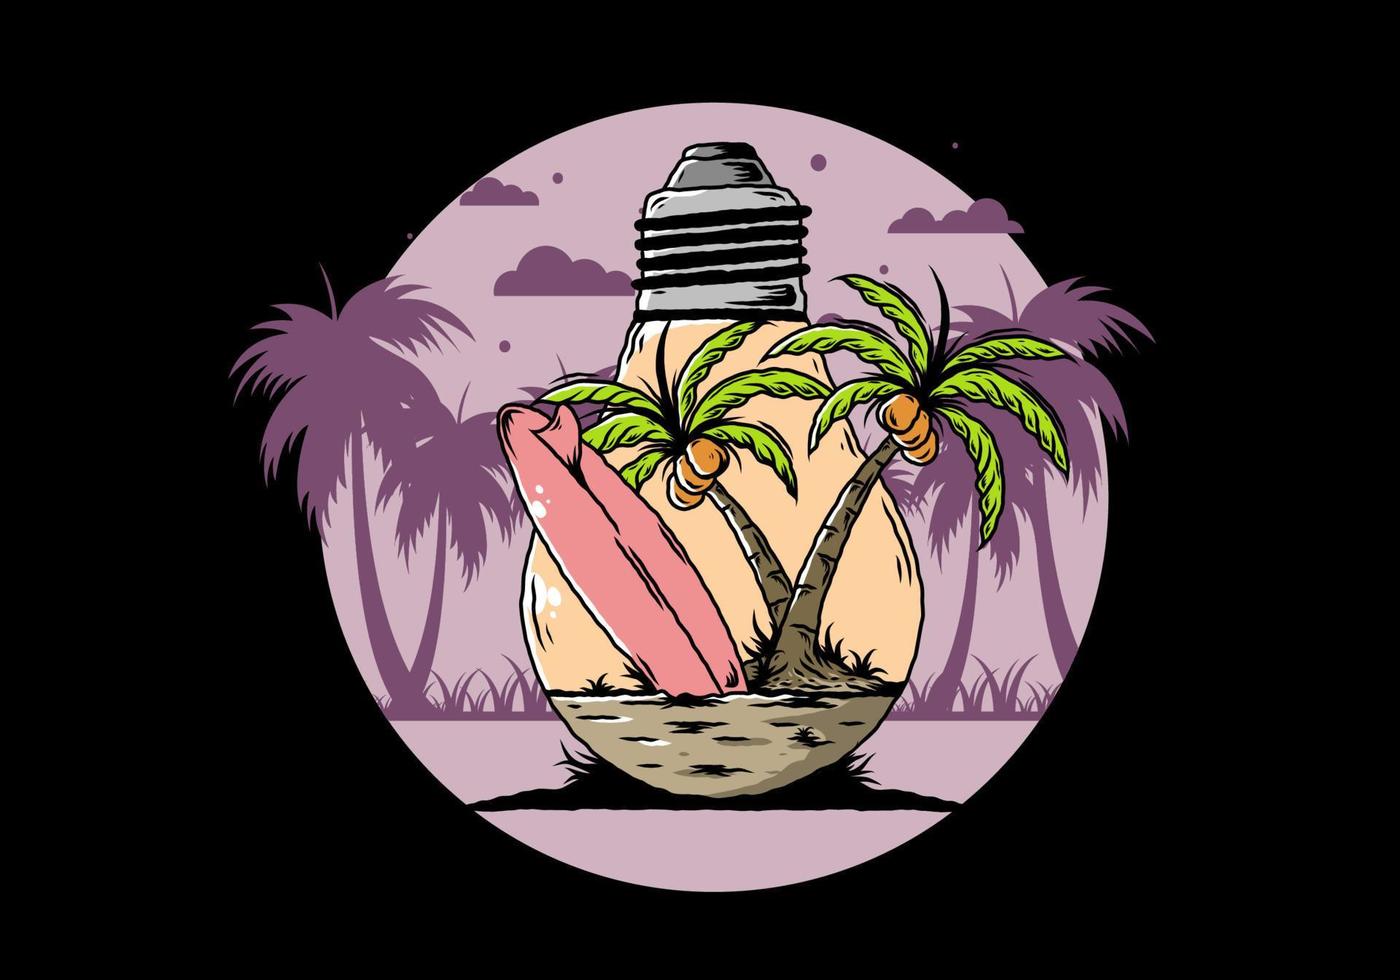 Coconut tree and surfing board in a bulb lamp illustration vector